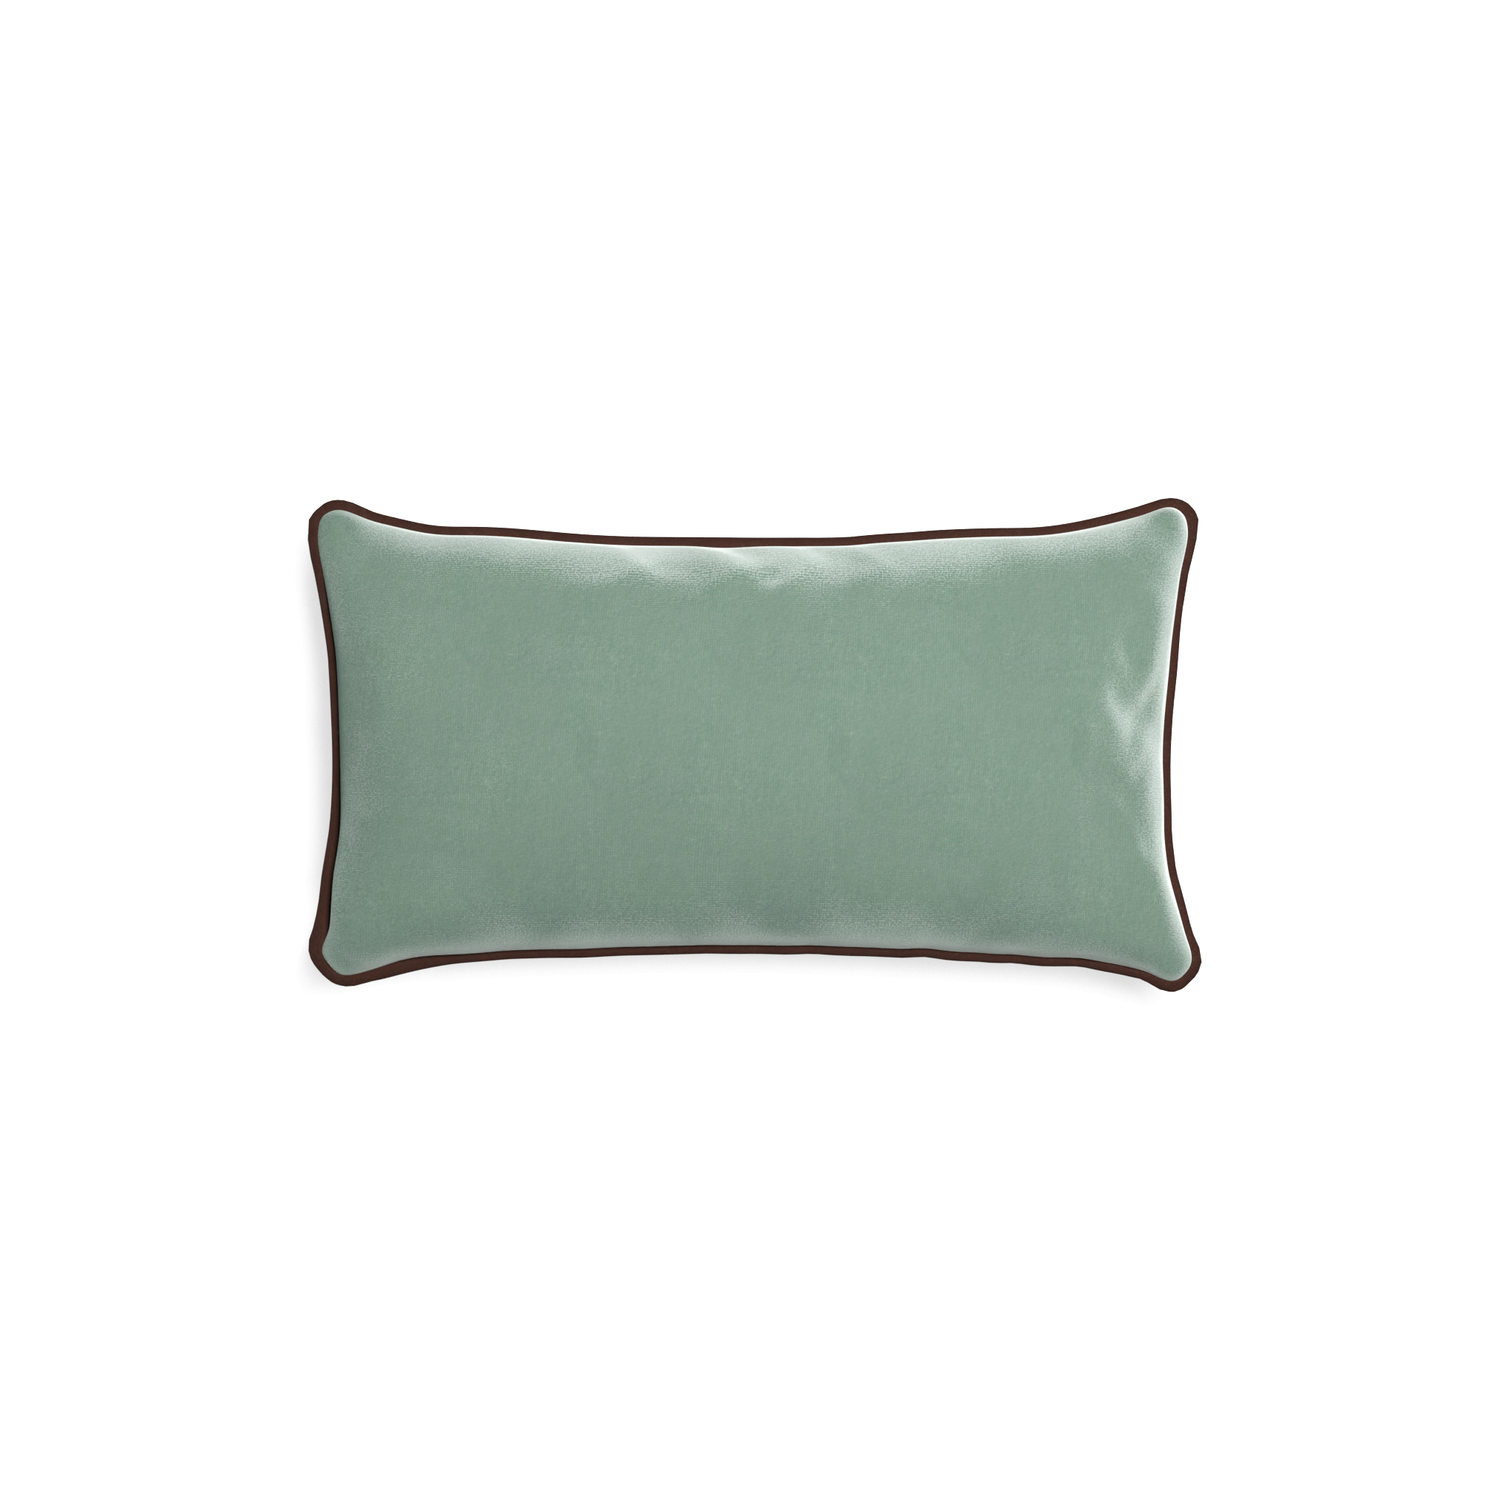 rectangle blue green velvet pillow with brown piping